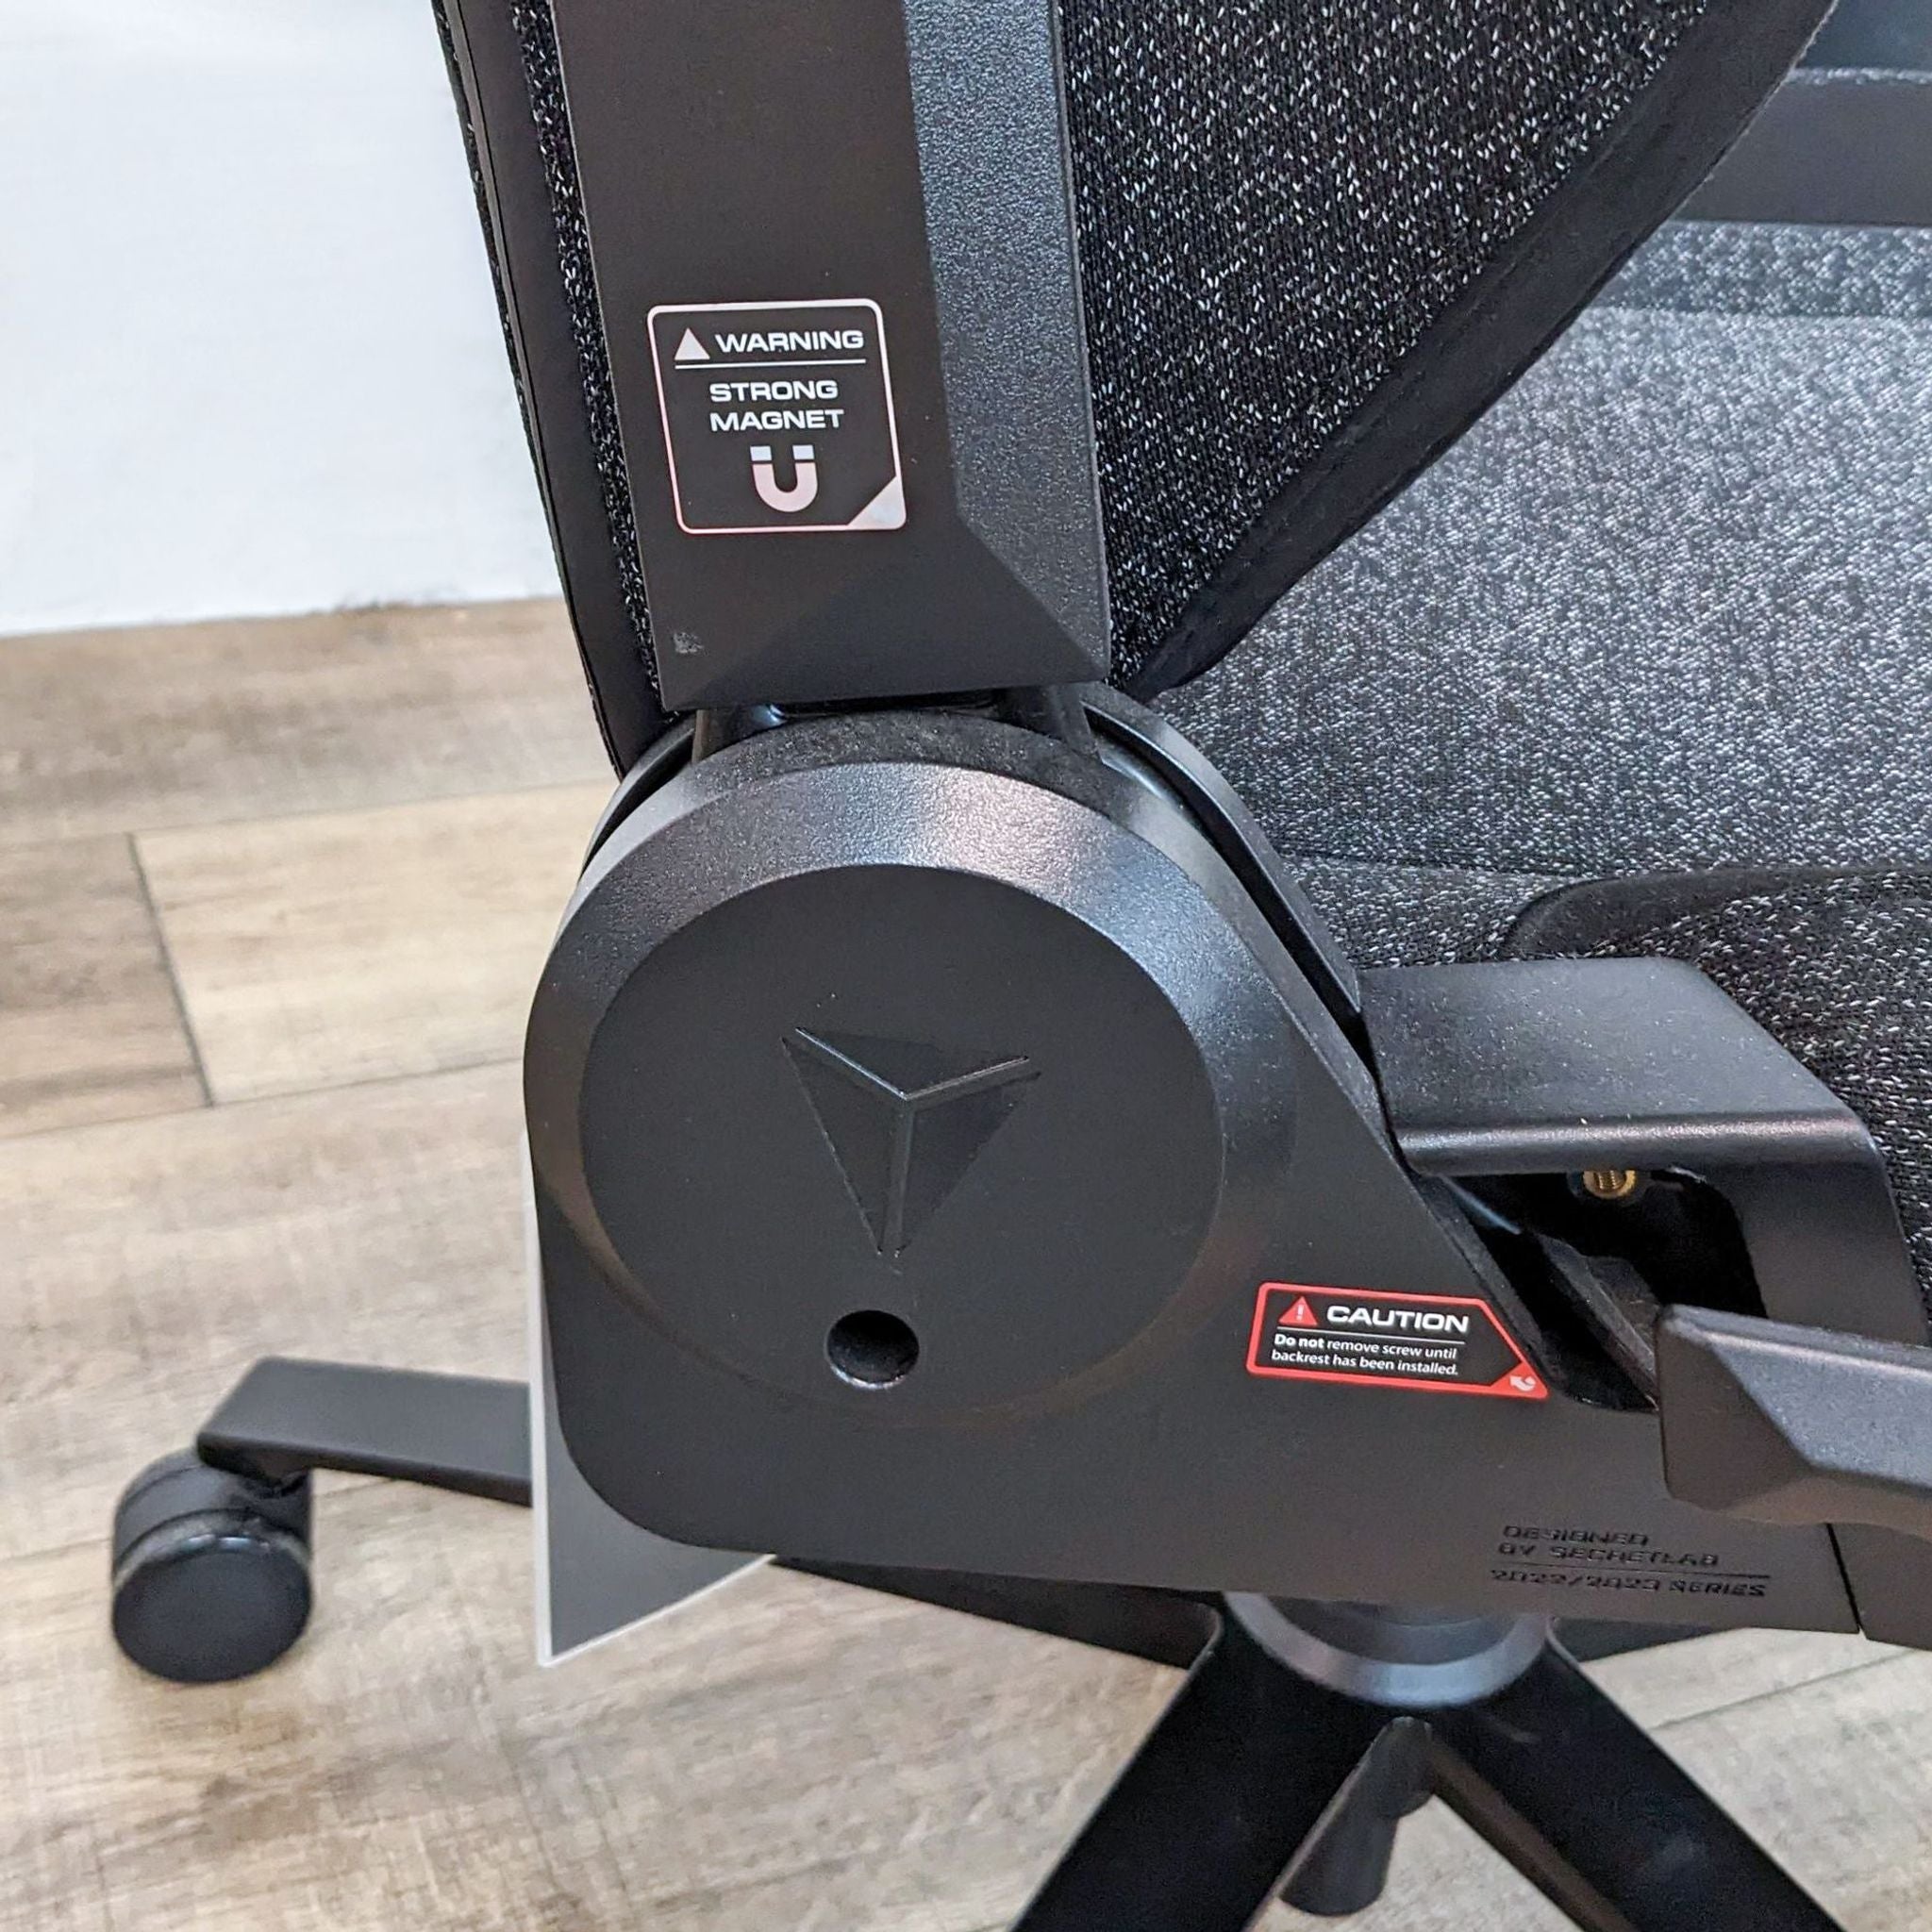 Close-up of the Secretlab Titan Evo gaming chair's hydraulic recline mechanism with warning labels.